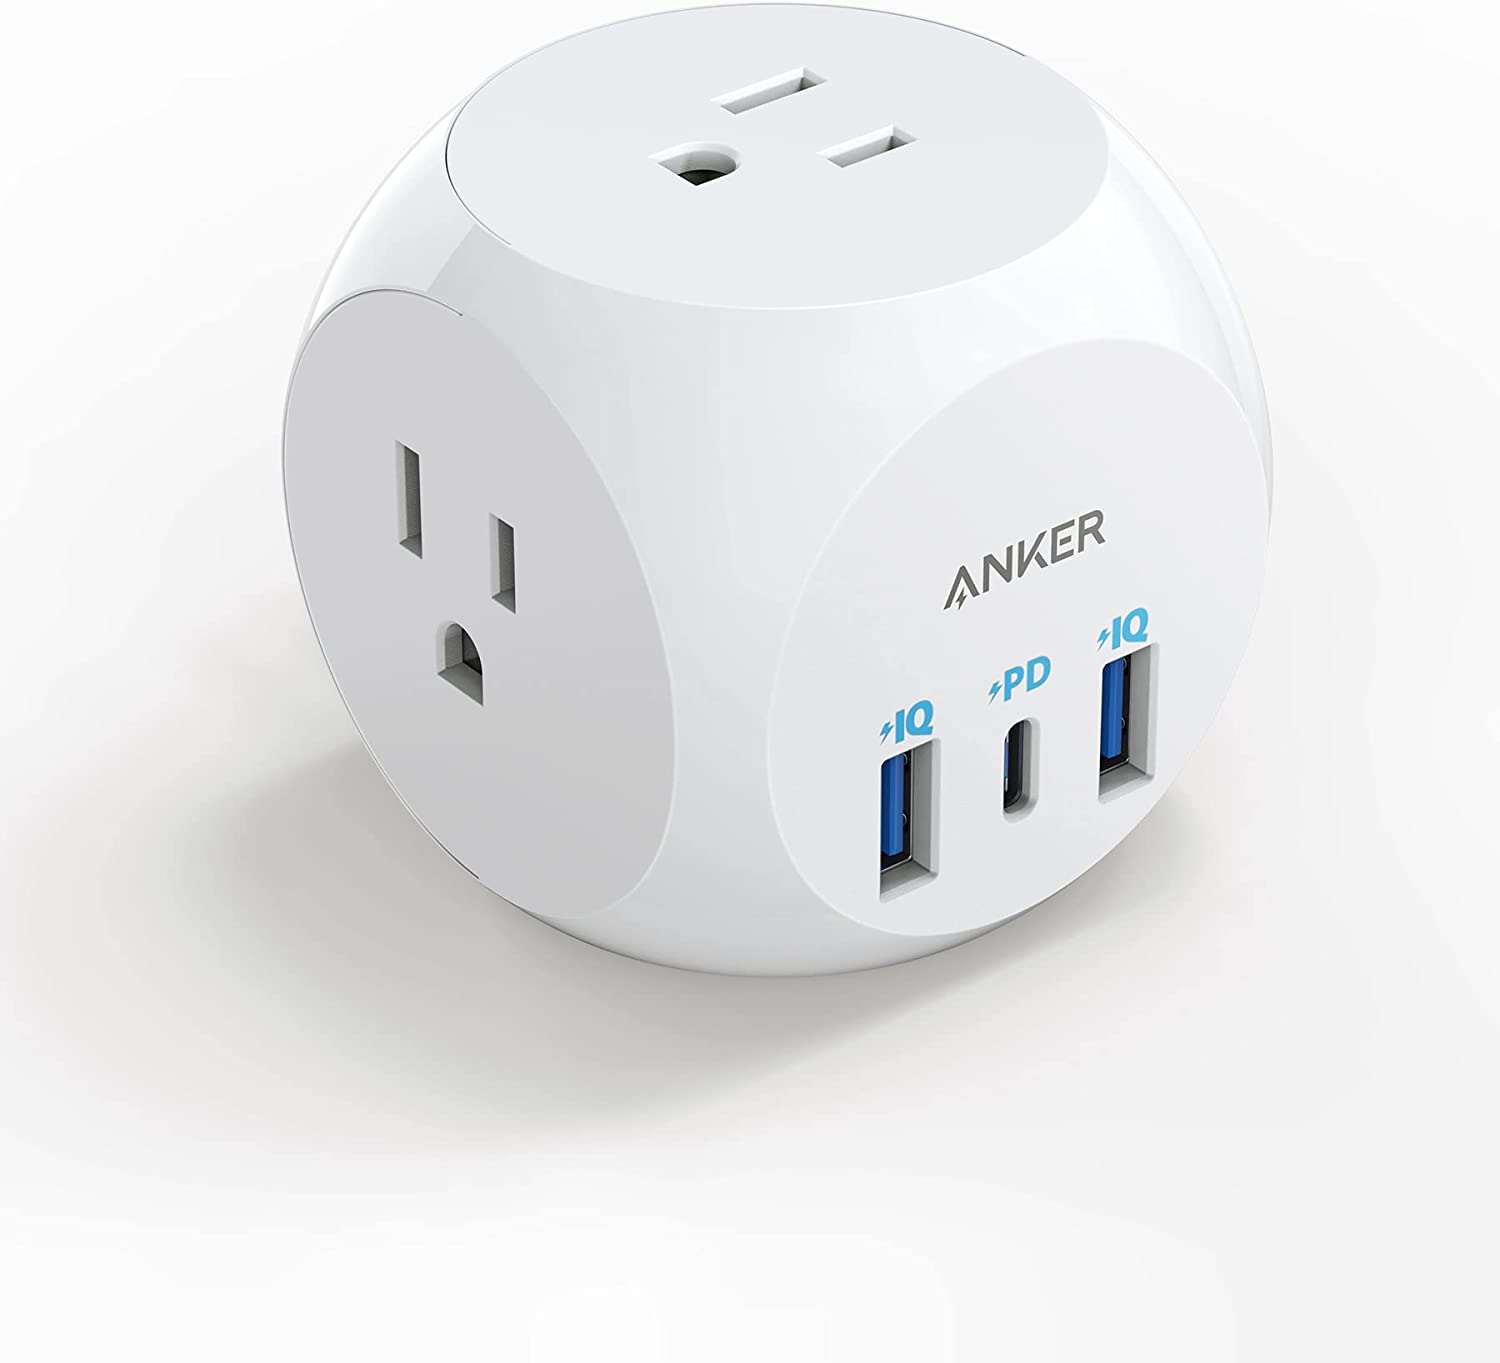 Anker 30W Multi Plug 3-Port AC / USB Outlet Extender w/ USB C PD $16 + Free Shipping